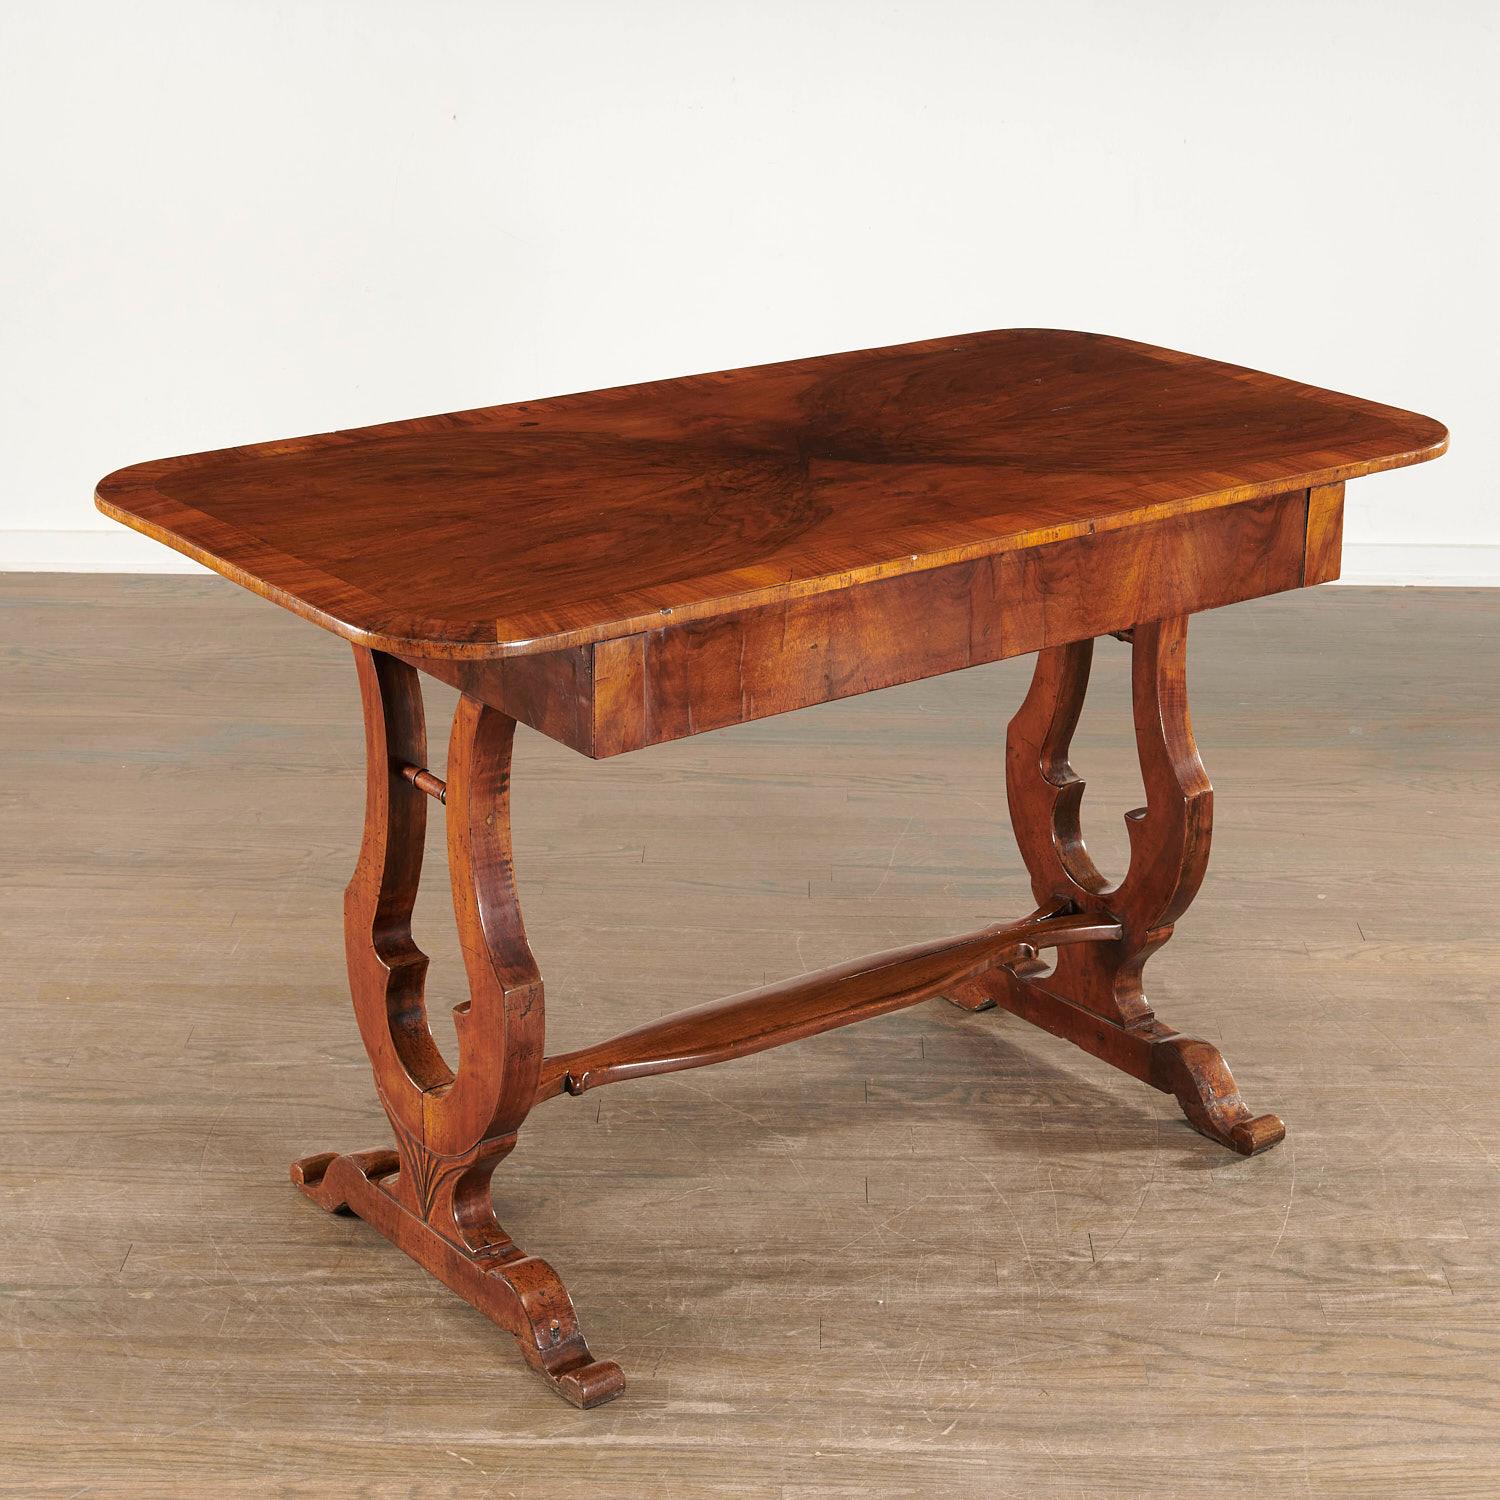 Wood Early 19th C. Biedermeier Sofa Table/Desk With Lyre-Form Trestle Base For Sale